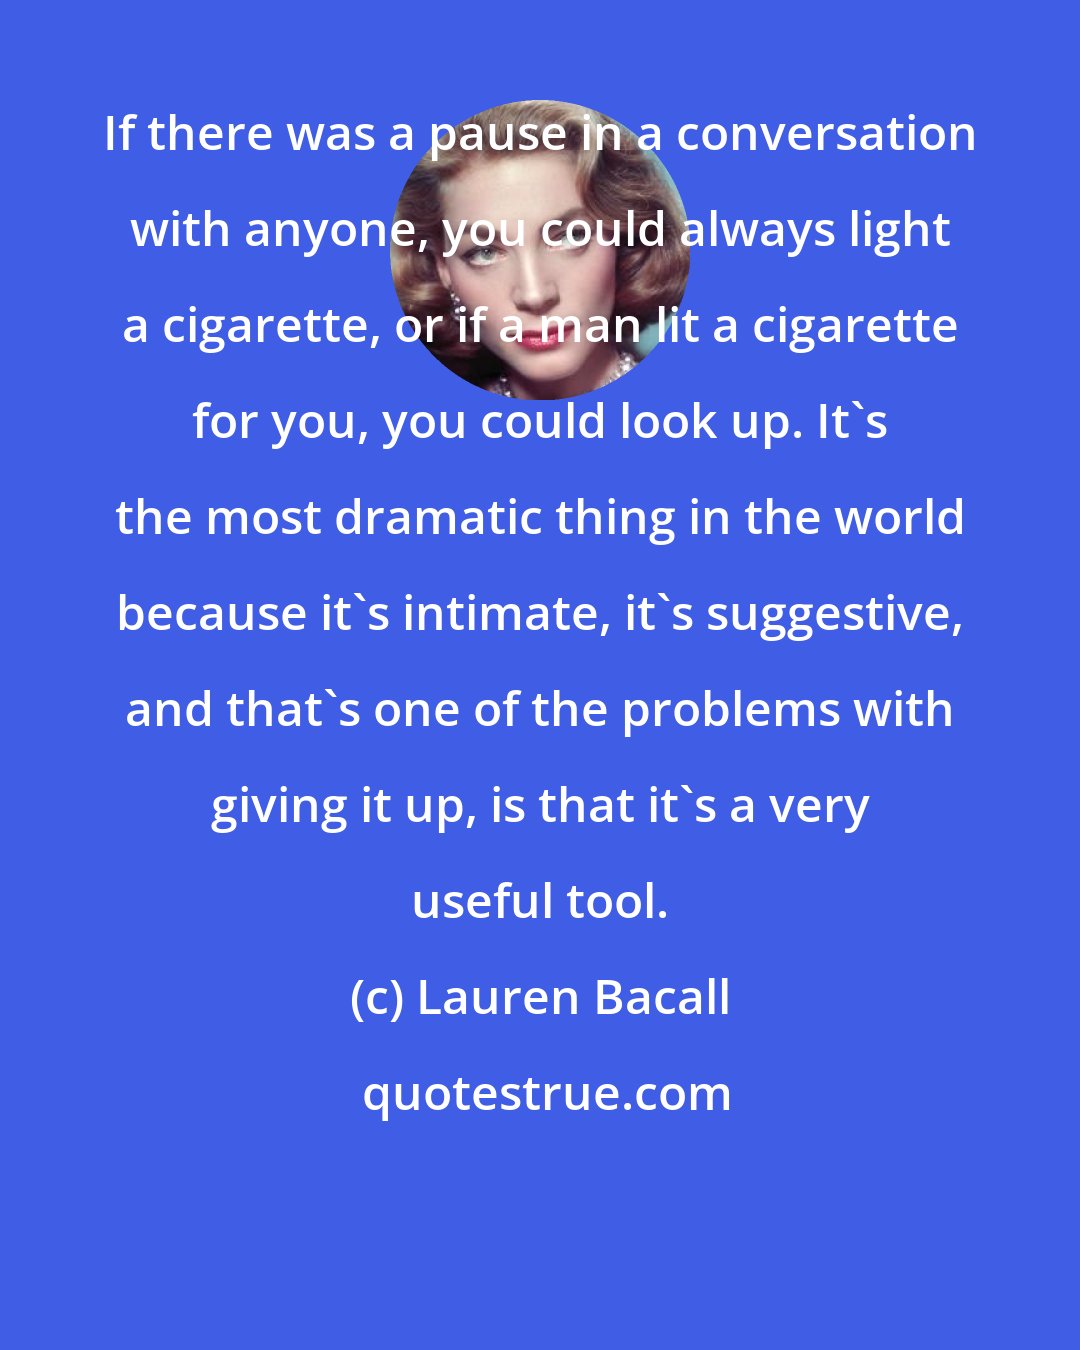 Lauren Bacall: If there was a pause in a conversation with anyone, you could always light a cigarette, or if a man lit a cigarette for you, you could look up. It's the most dramatic thing in the world because it's intimate, it's suggestive, and that's one of the problems with giving it up, is that it's a very useful tool.